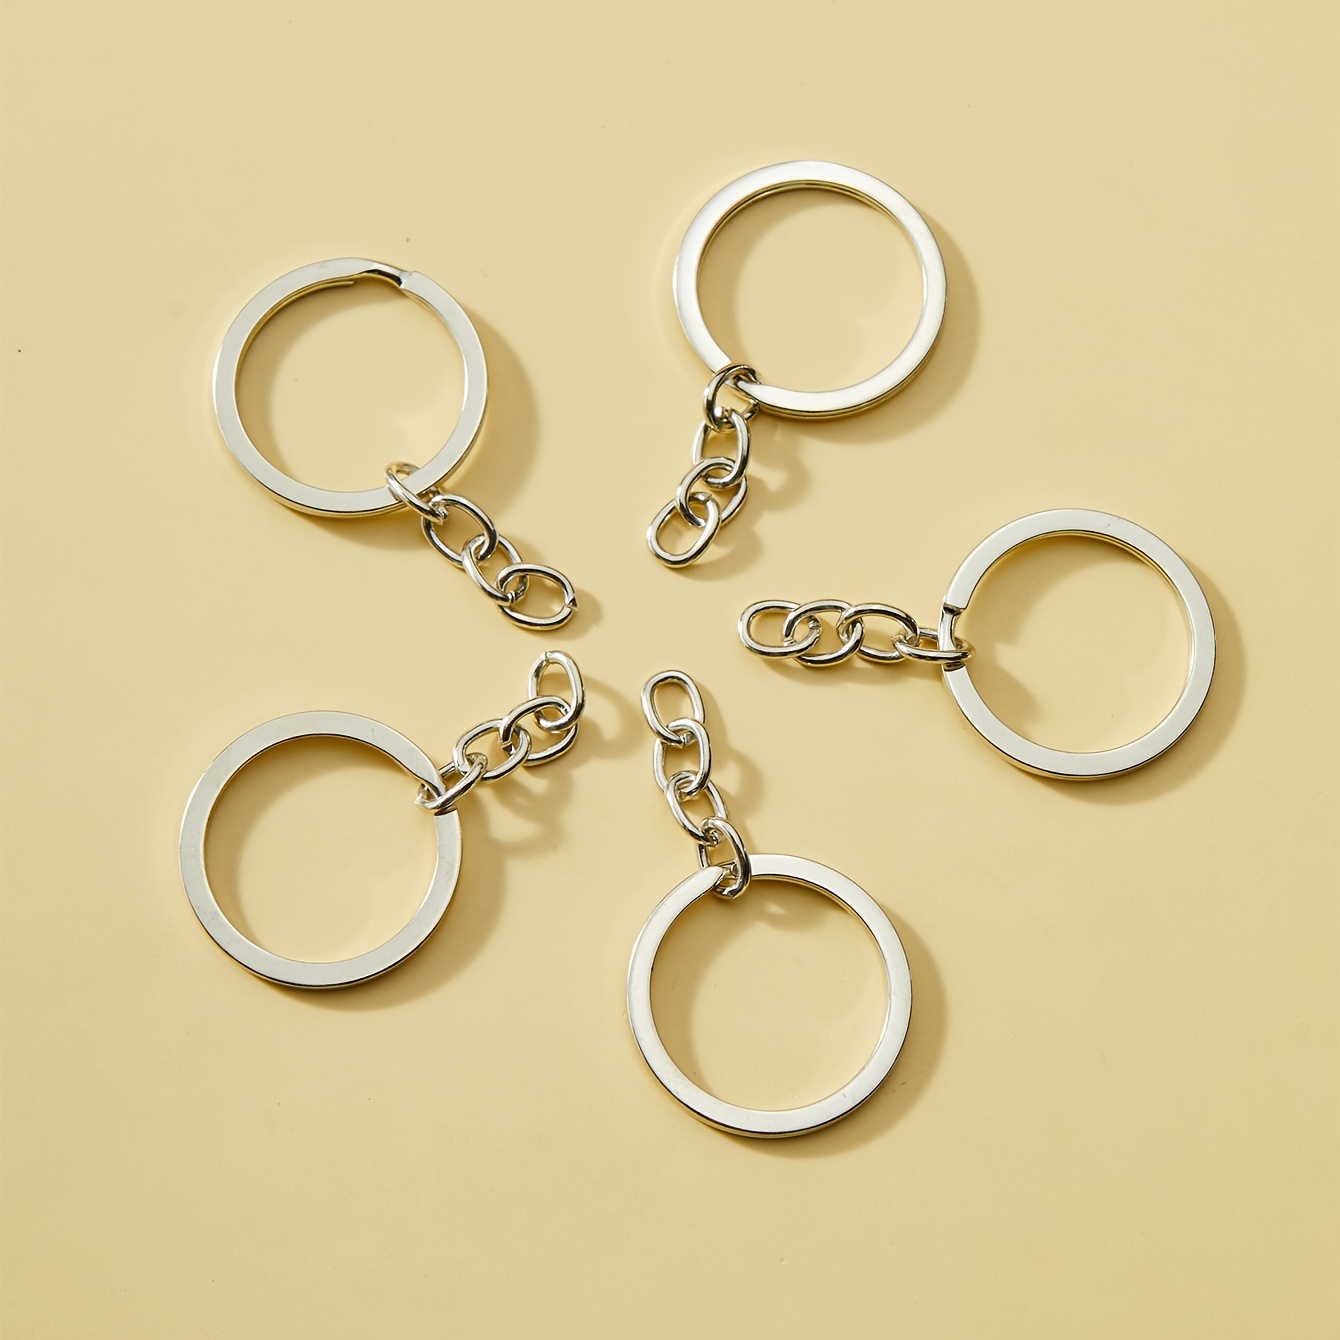 5pcs Key Chains For Crafts Keychain Rings Chain Split Key Ring Suitable For  Keychain, Crafts, Jewelry Making And DIY